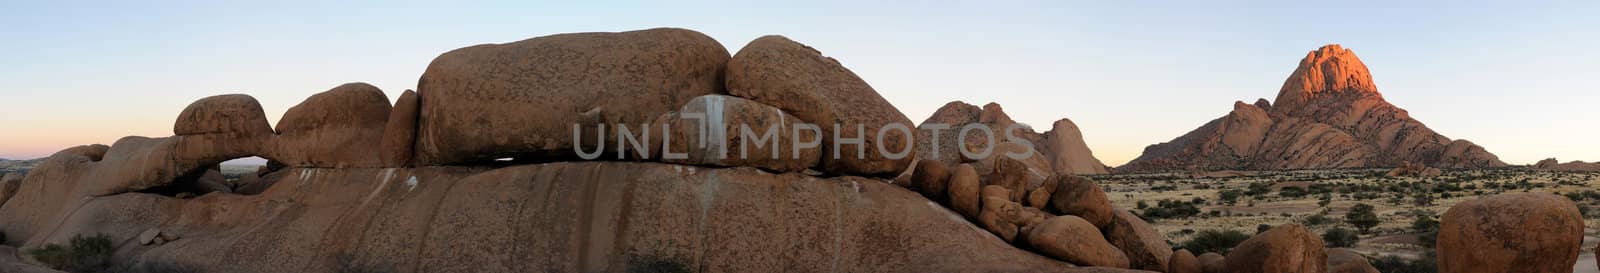 Panorama from eleven photos of the natural arch and Spitzkoppe in Namibia